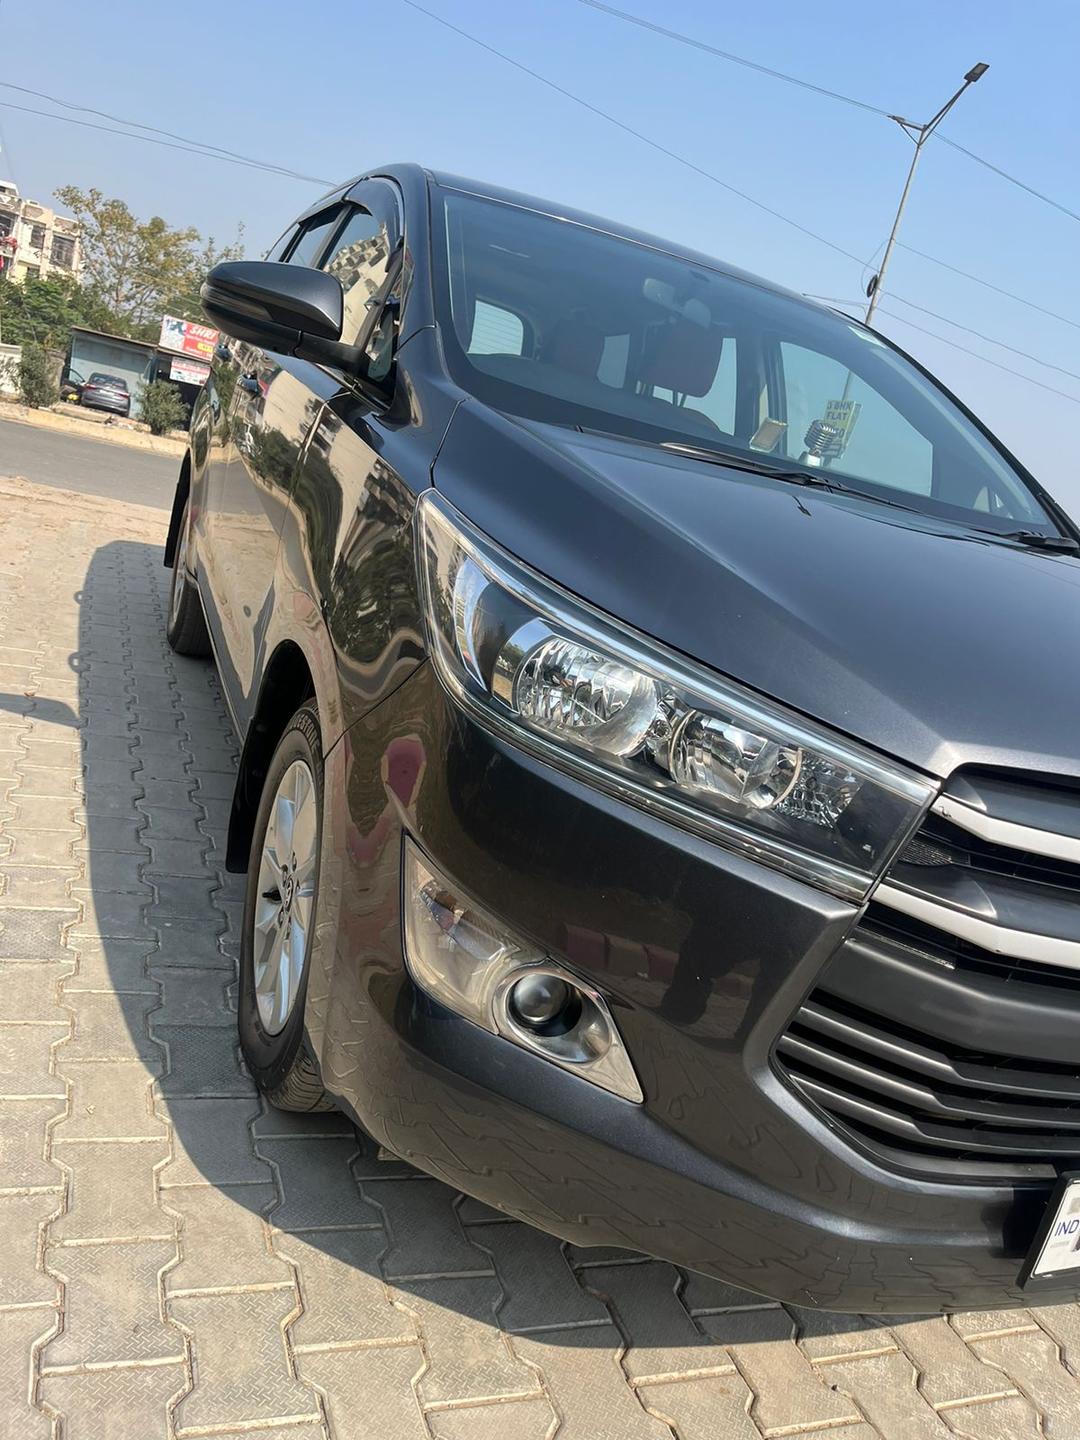 2019 Toyota Innova Crysta 2.4 GX MT 7-Seater BS IV Cover Image 